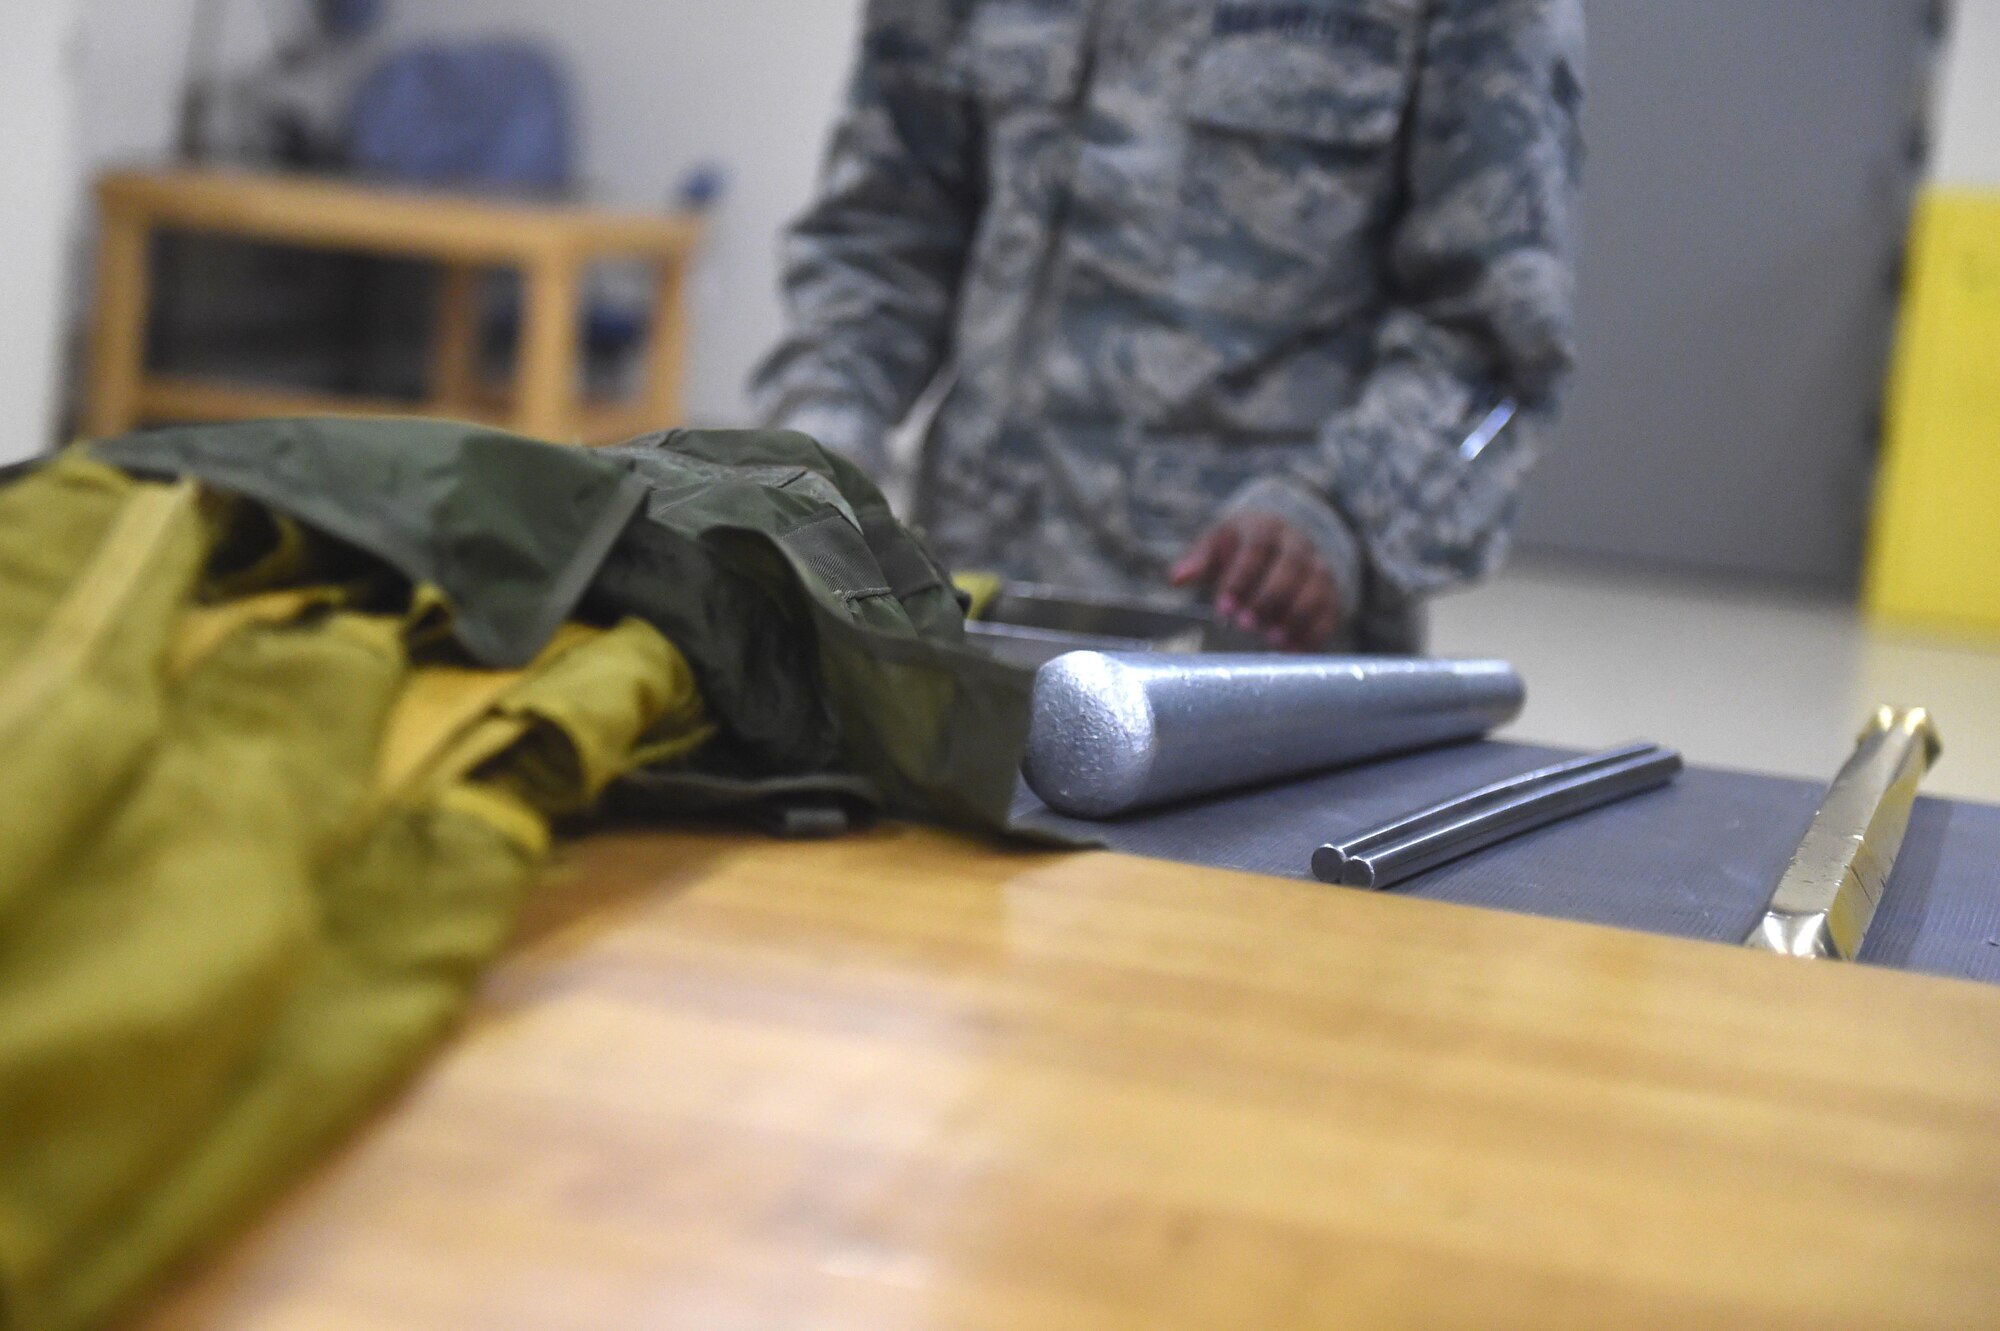 Airman 1st Class Dondrel, a 49th Operations Support Squadron aircrew flight equipment technician, places his packing tools near his work area at Holloman Air Force Base, N.M., July 21. AFE specialists ensure that pilots are equipped with supplies for any situation.  (Last names are being withheld due to operational requirements. U.S. Air Force photo by Staff Sgt. Eboni Prince)